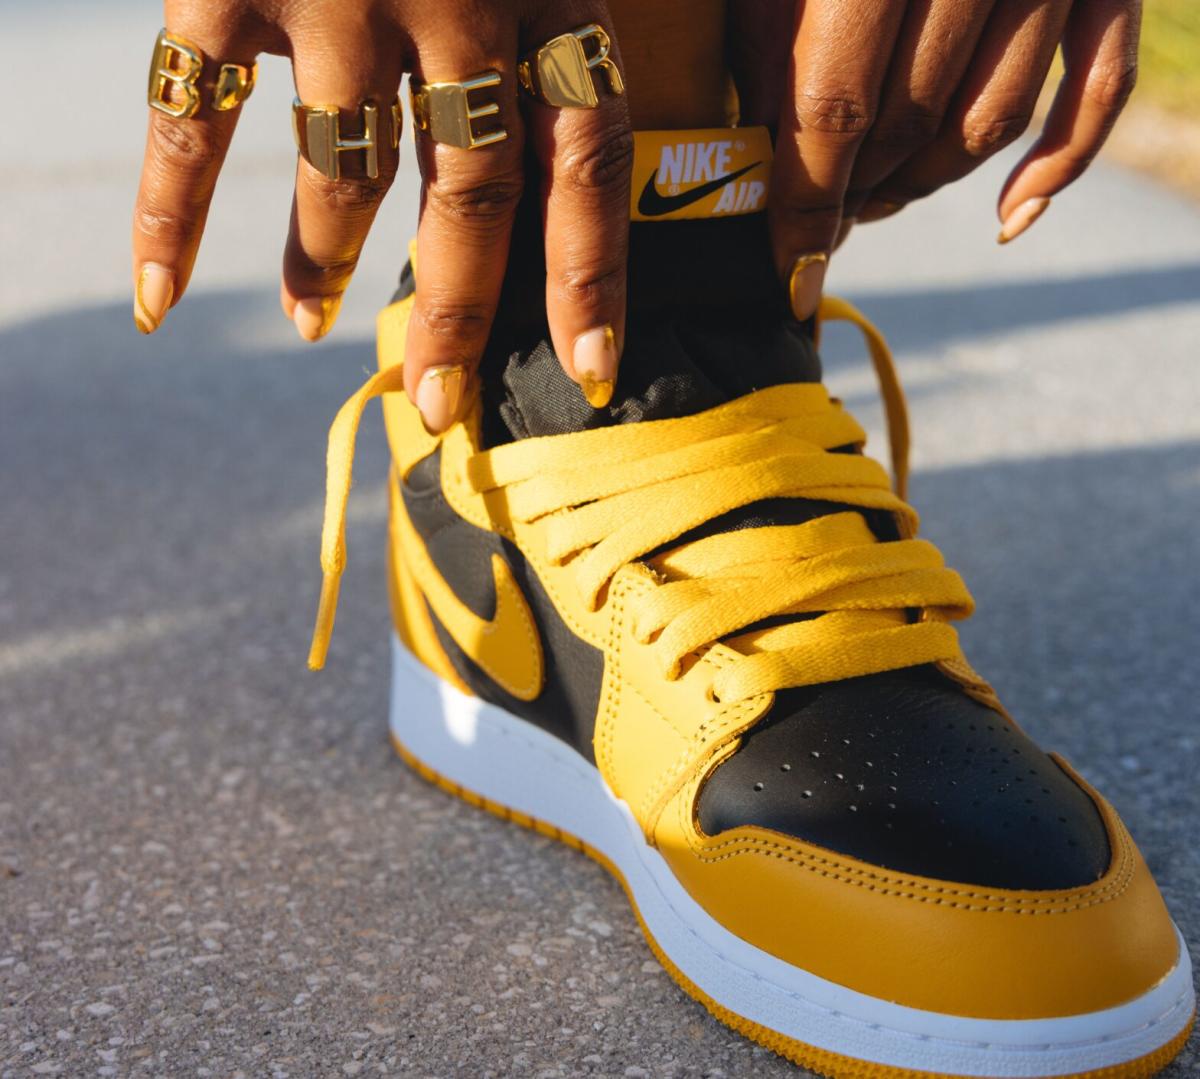 Nike Black and Yellow Shoes: Eye-Catching and Trendy Sneakers for Your Style